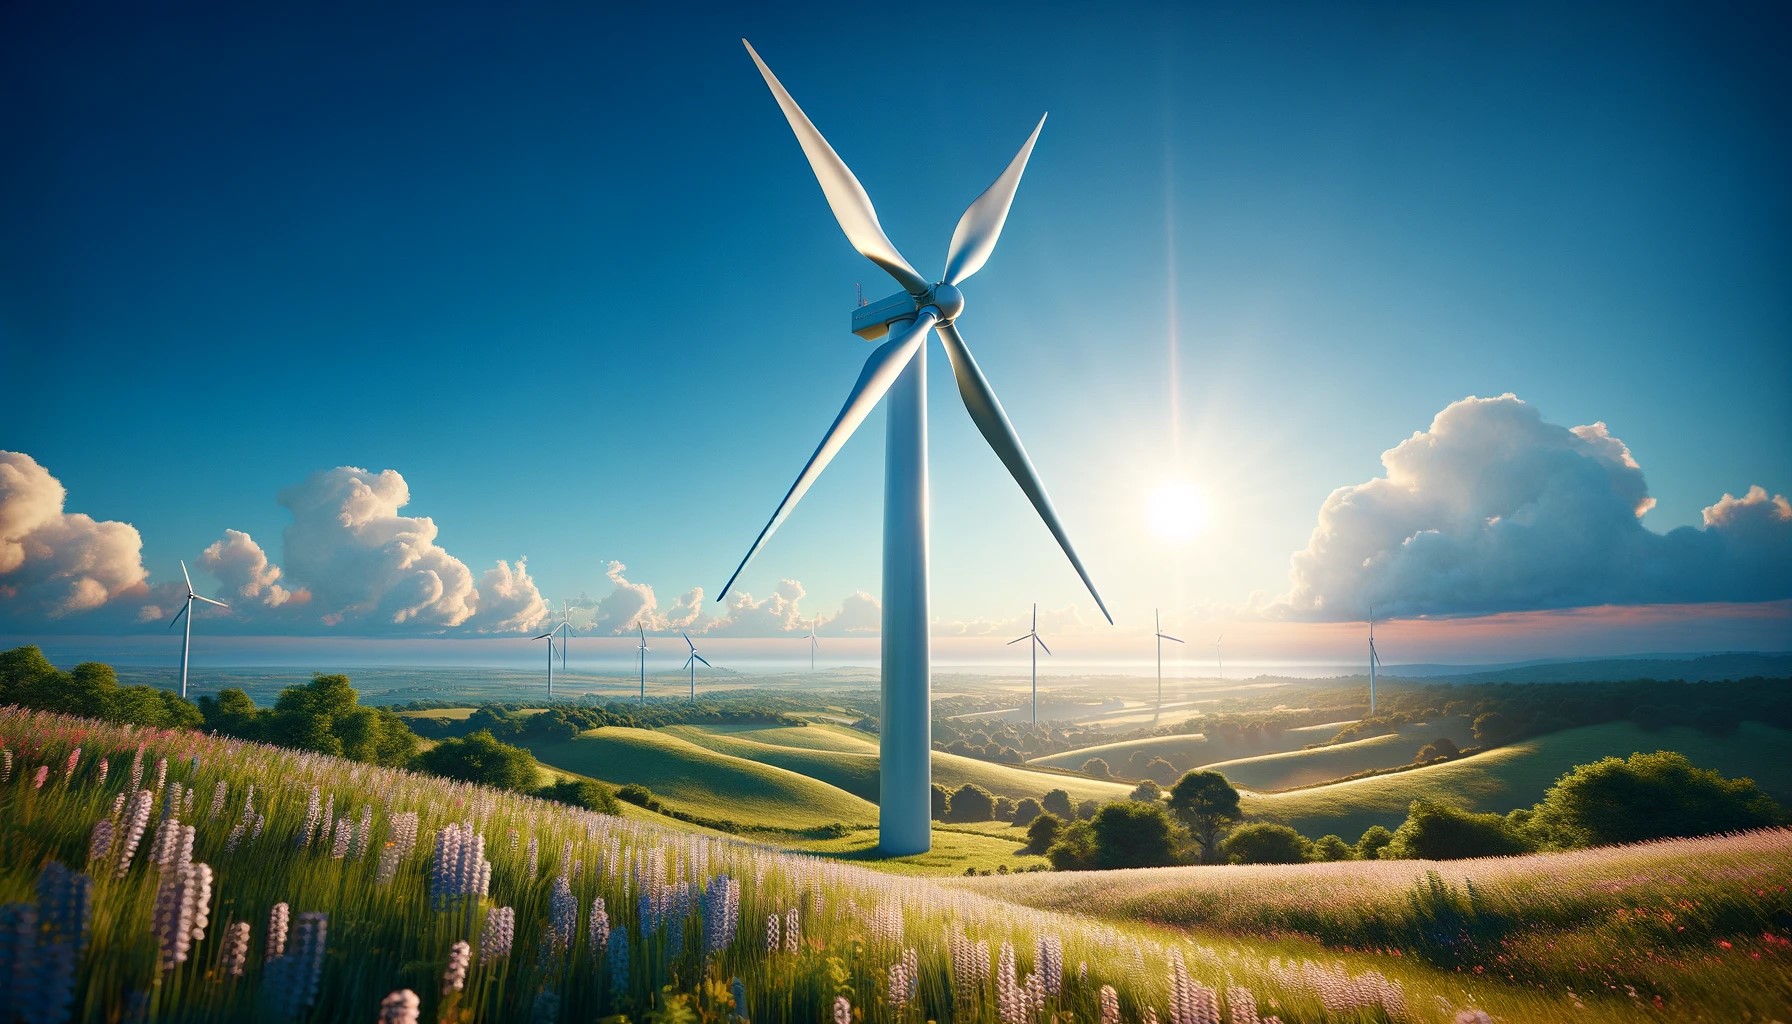 Wind Turbine Animation Creation Process and Its Challenges